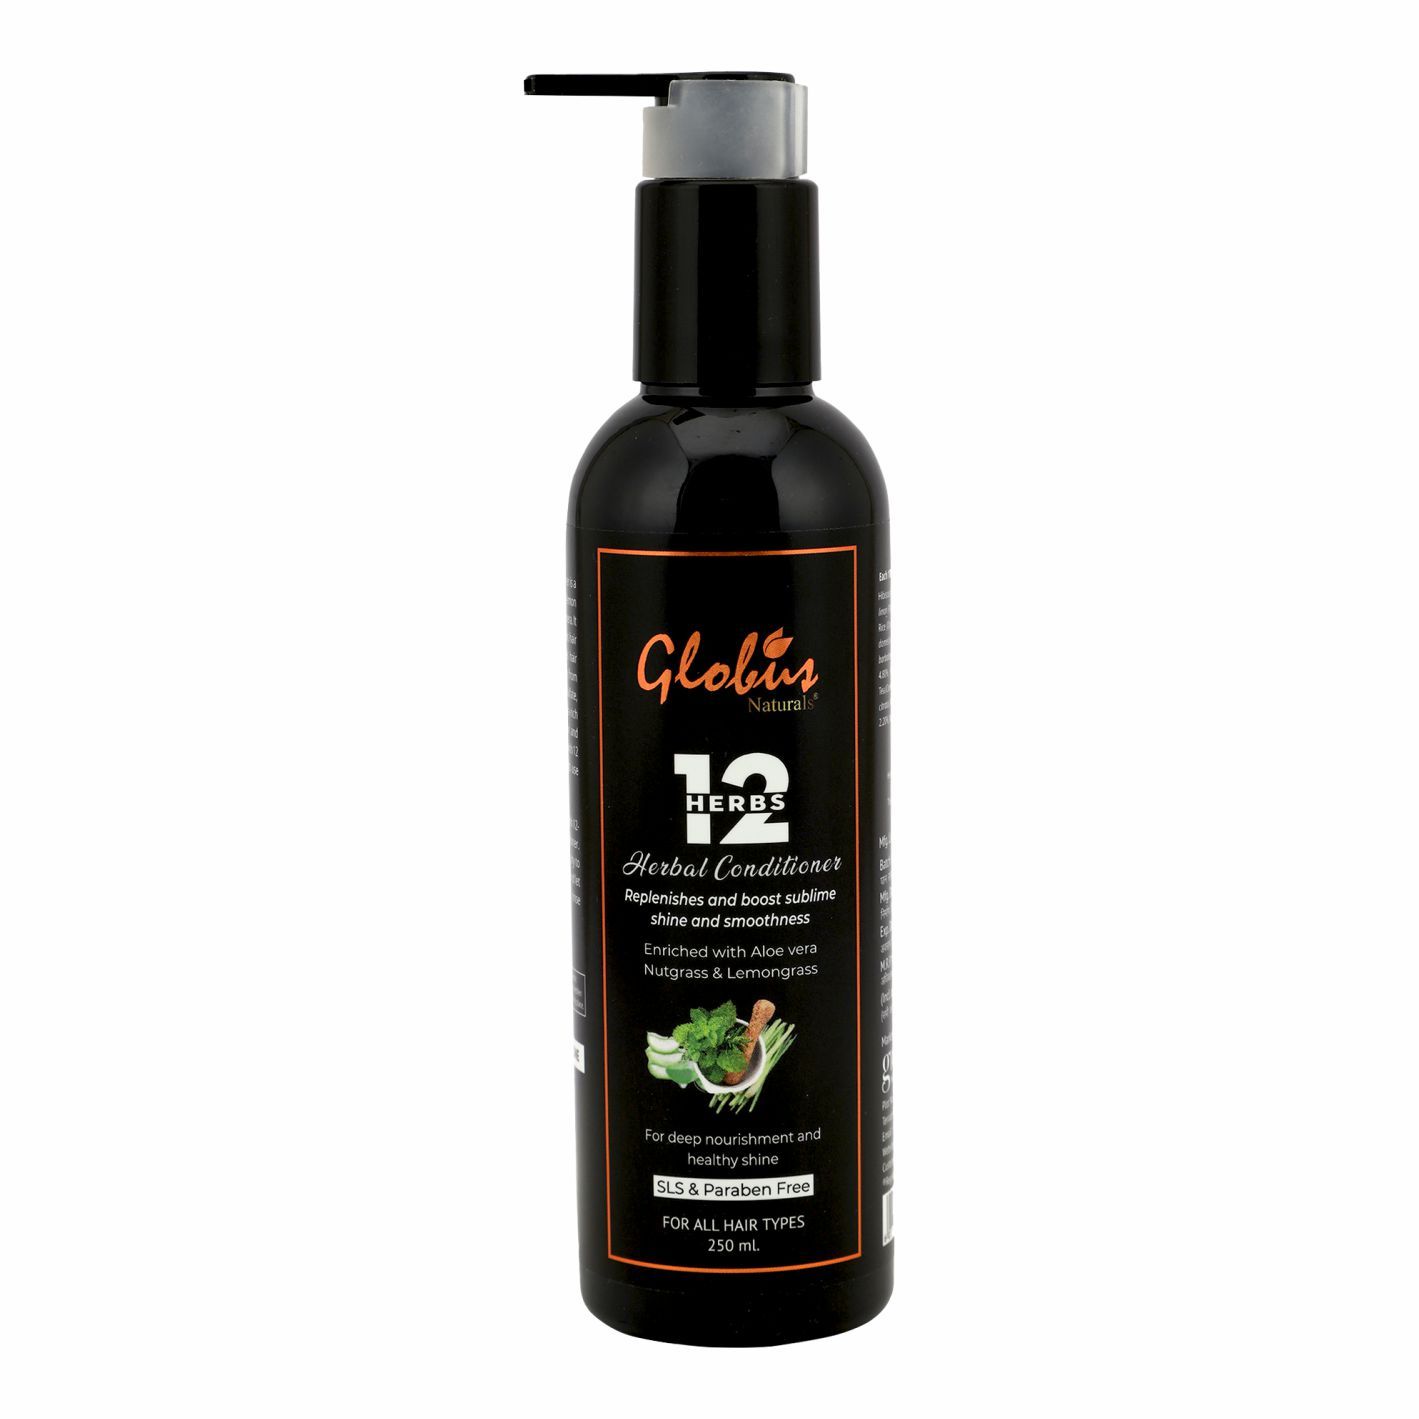 Globus Naturals 12 Herbs Hair Growth Conditioner For Deep Nourishment